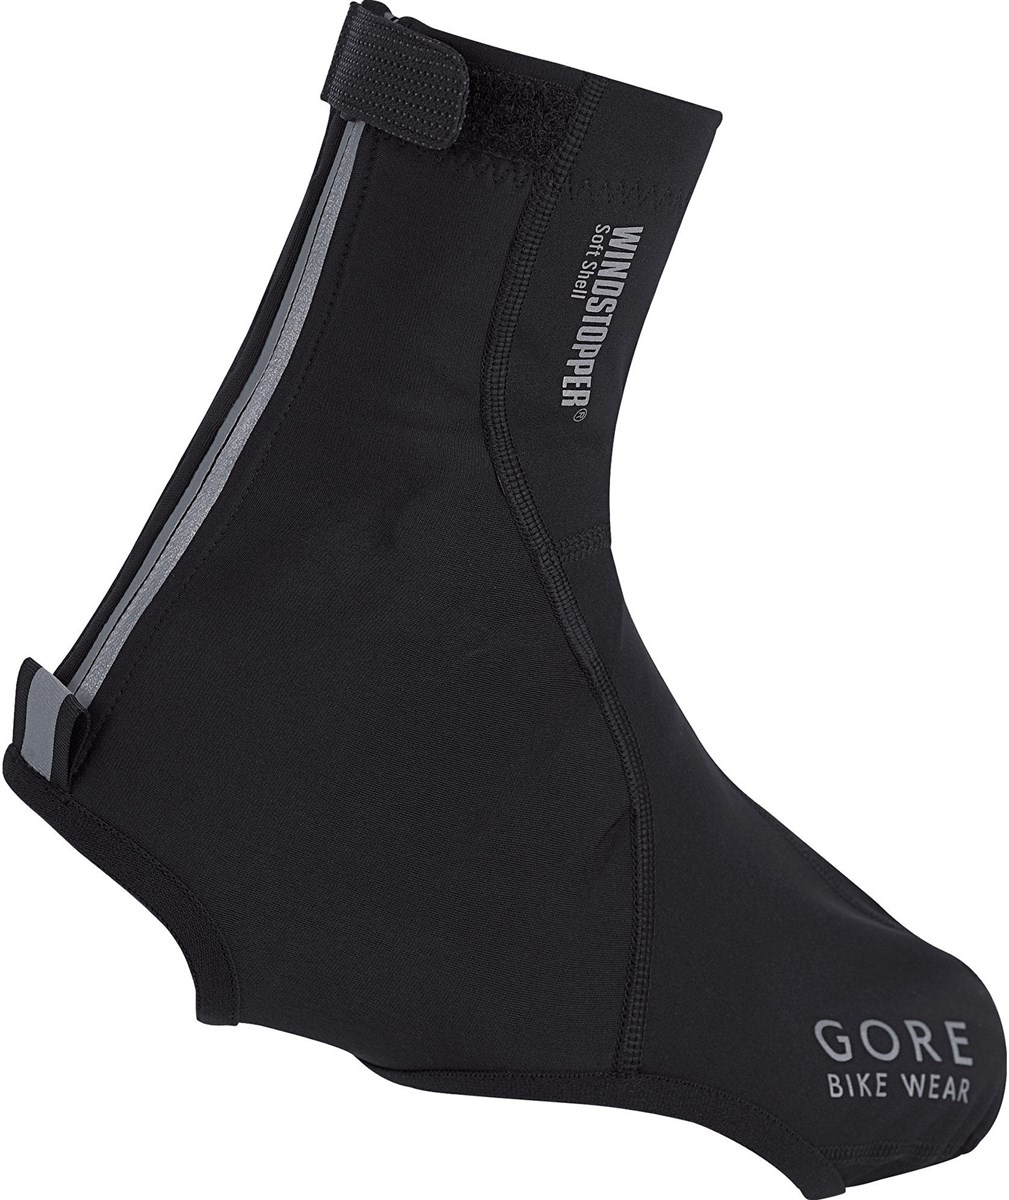 Gore Road Gore Windstopper Light Overshoes SS17 product image